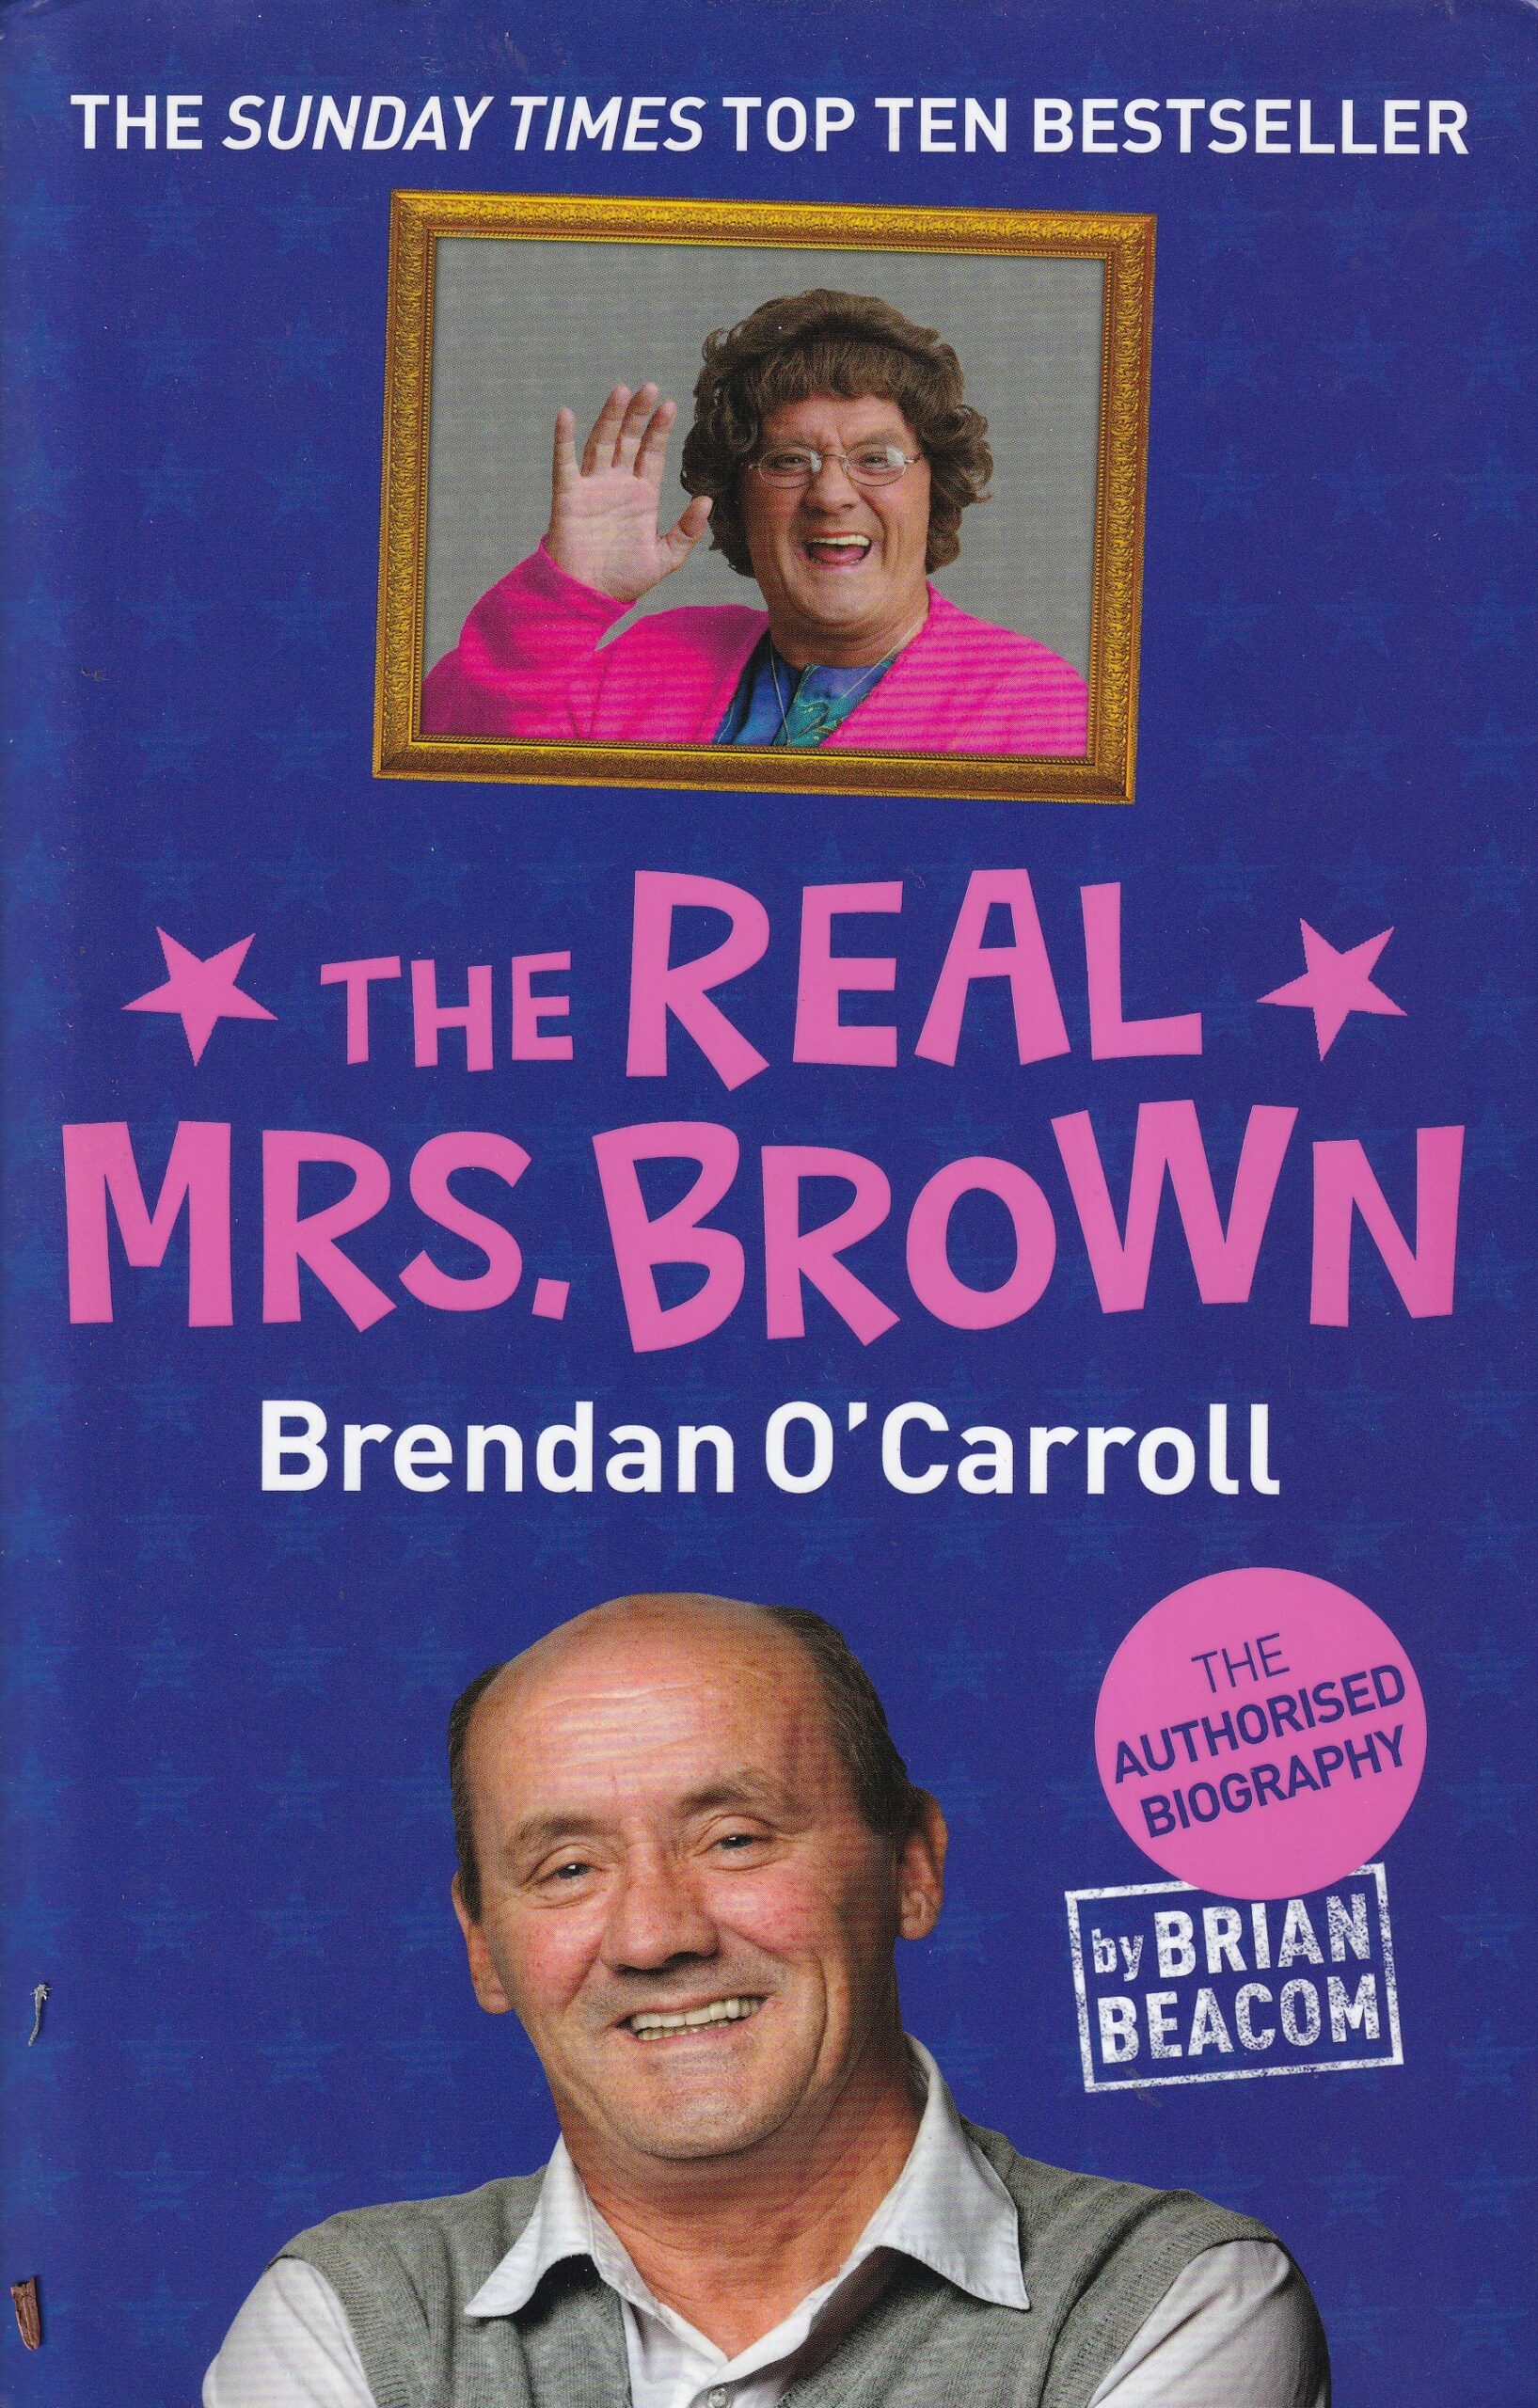 The Real Mrs. Brown by Brendan O'Carroll